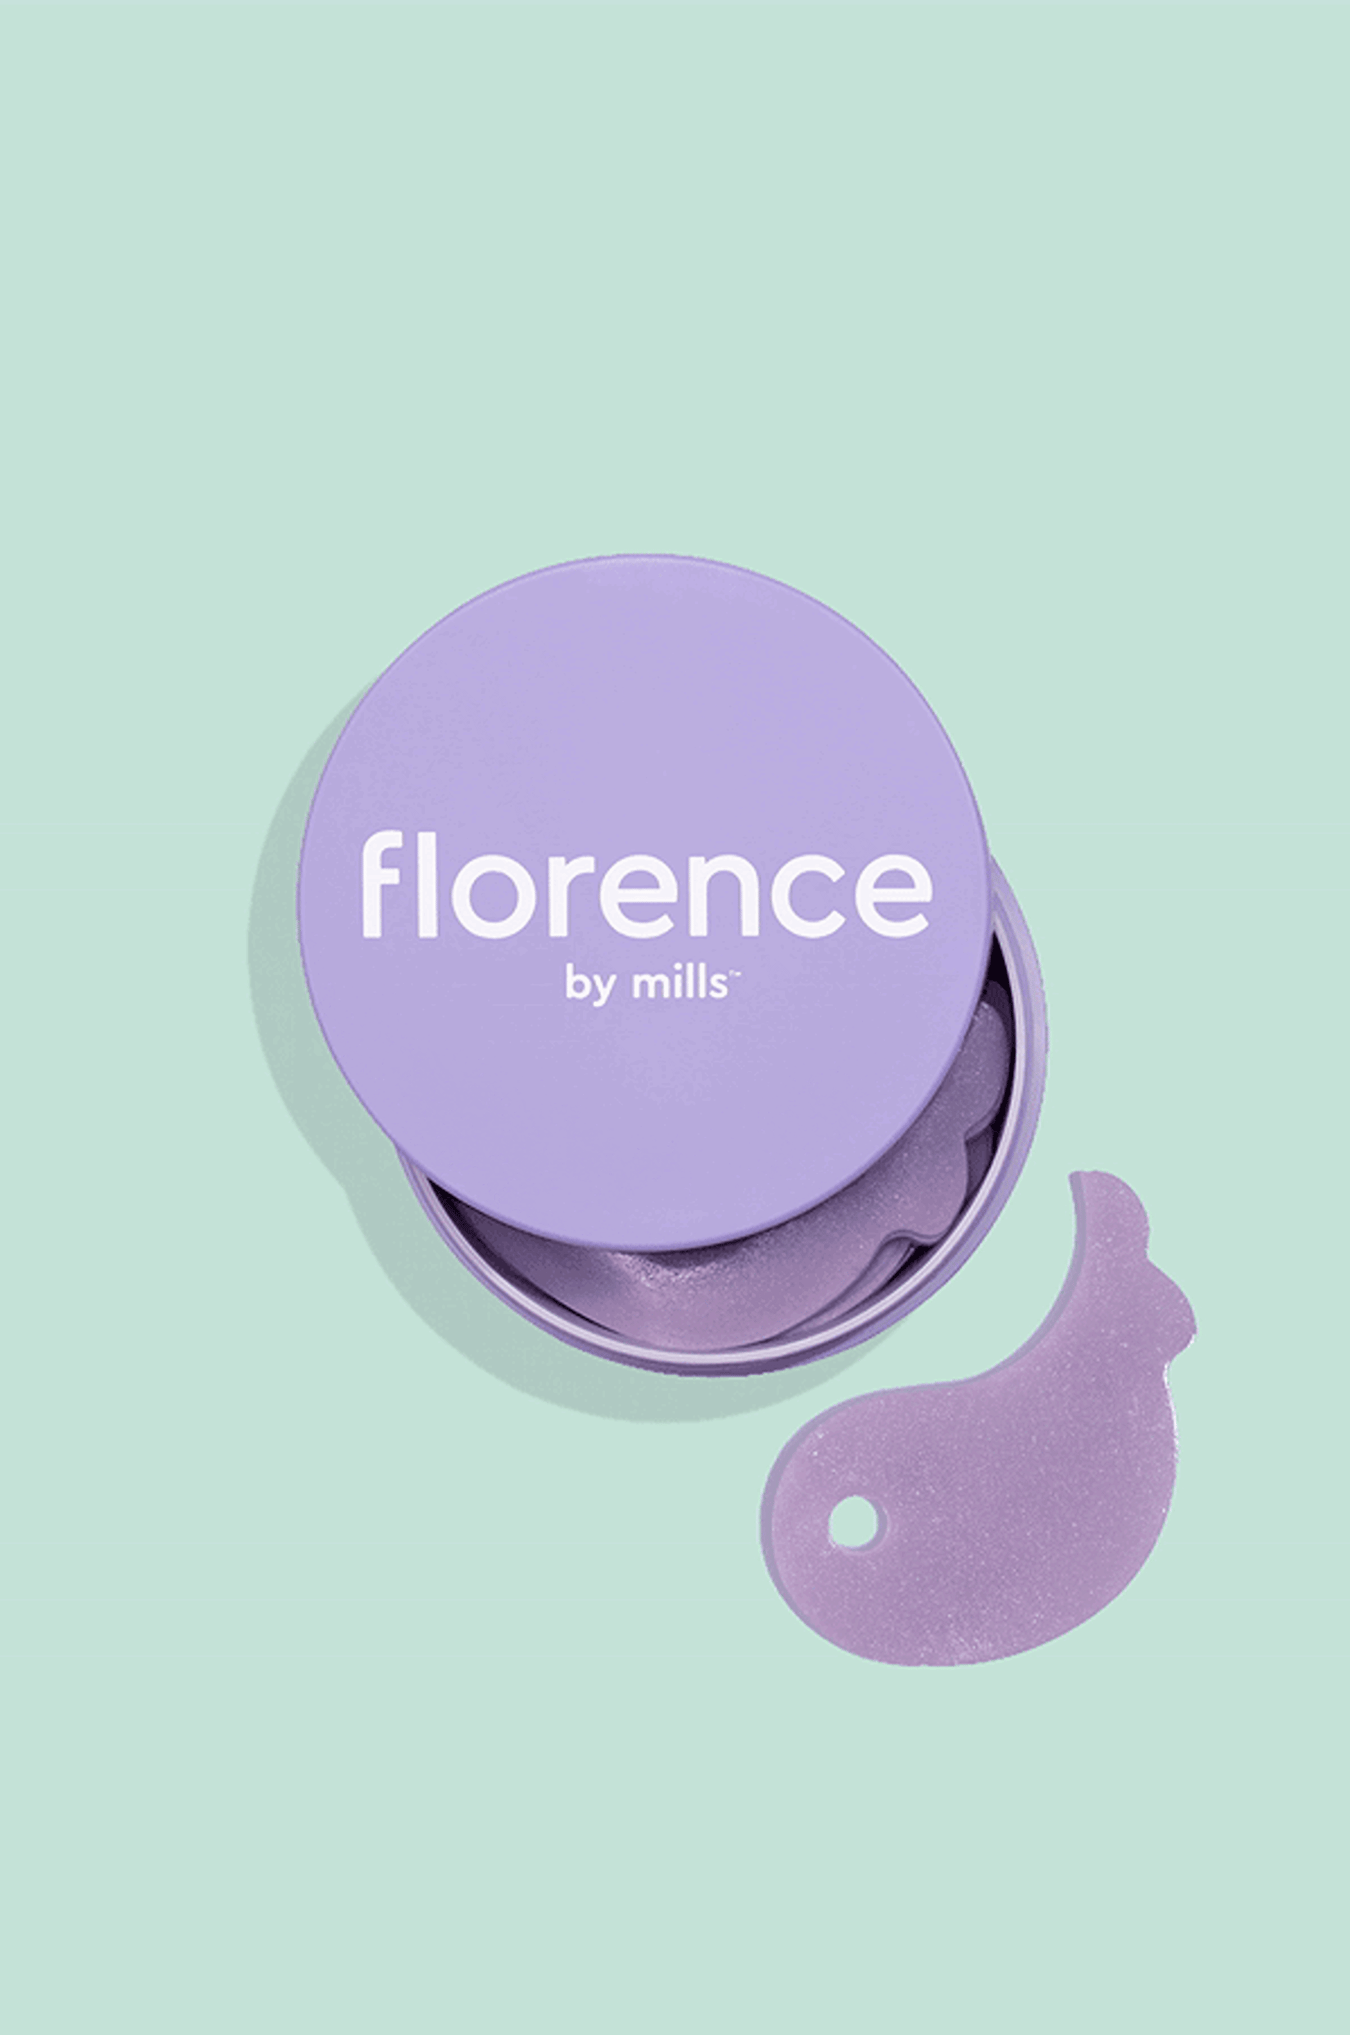 florence by mills Floating Under the Eyes Depuffing Gel Pads | Re-Energize  Tired Under Eyes | Hydrating | Vegan & Cruelty-Free - 30 Pairs/60 count